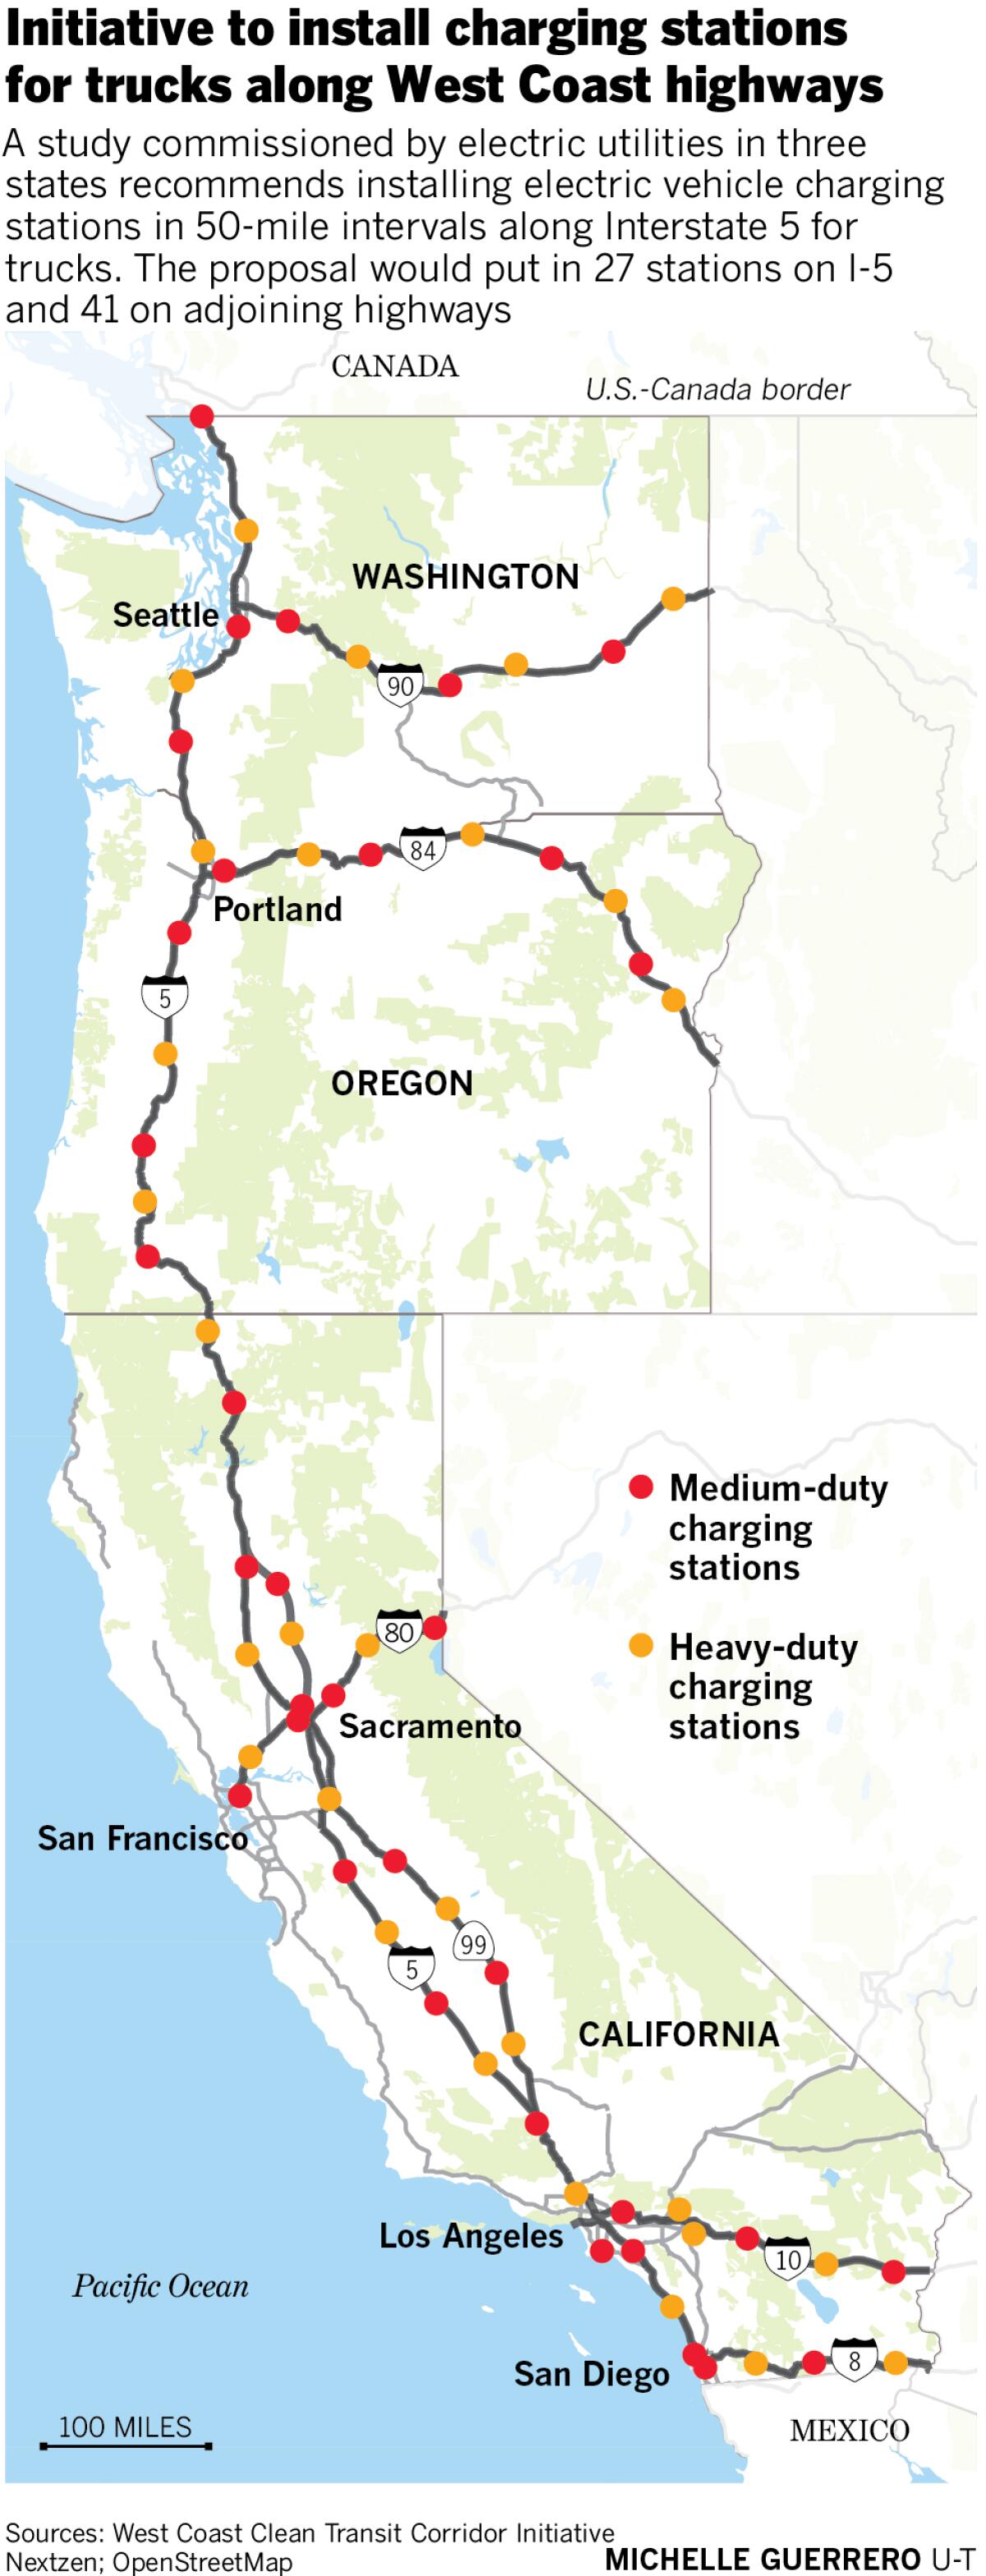 Map showing where the charging stations would be